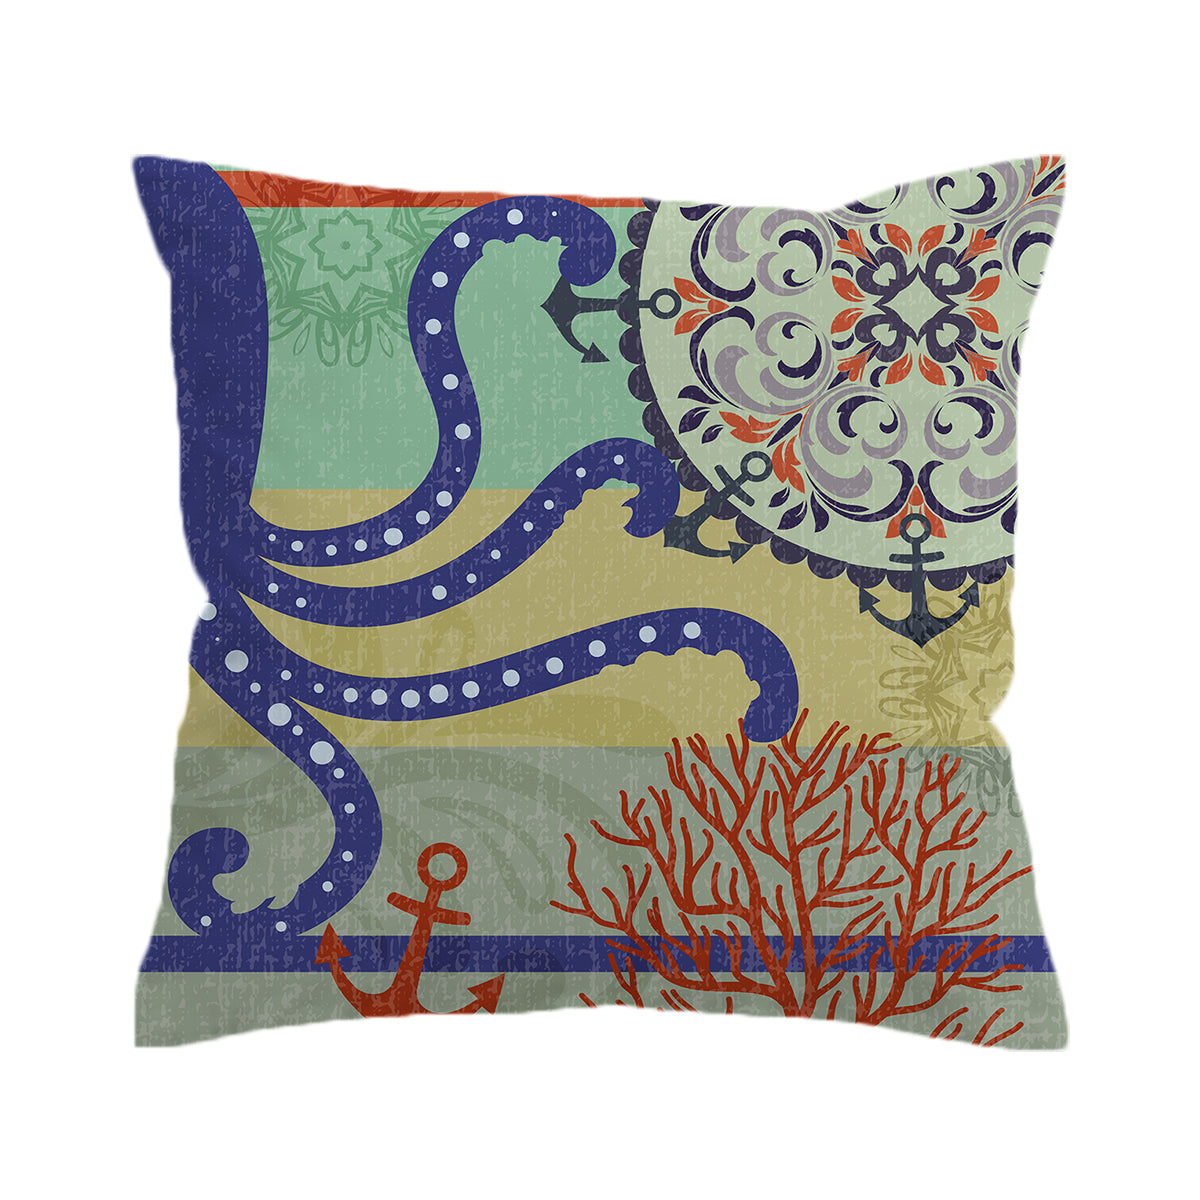 Octopus Passion Pillow Cover